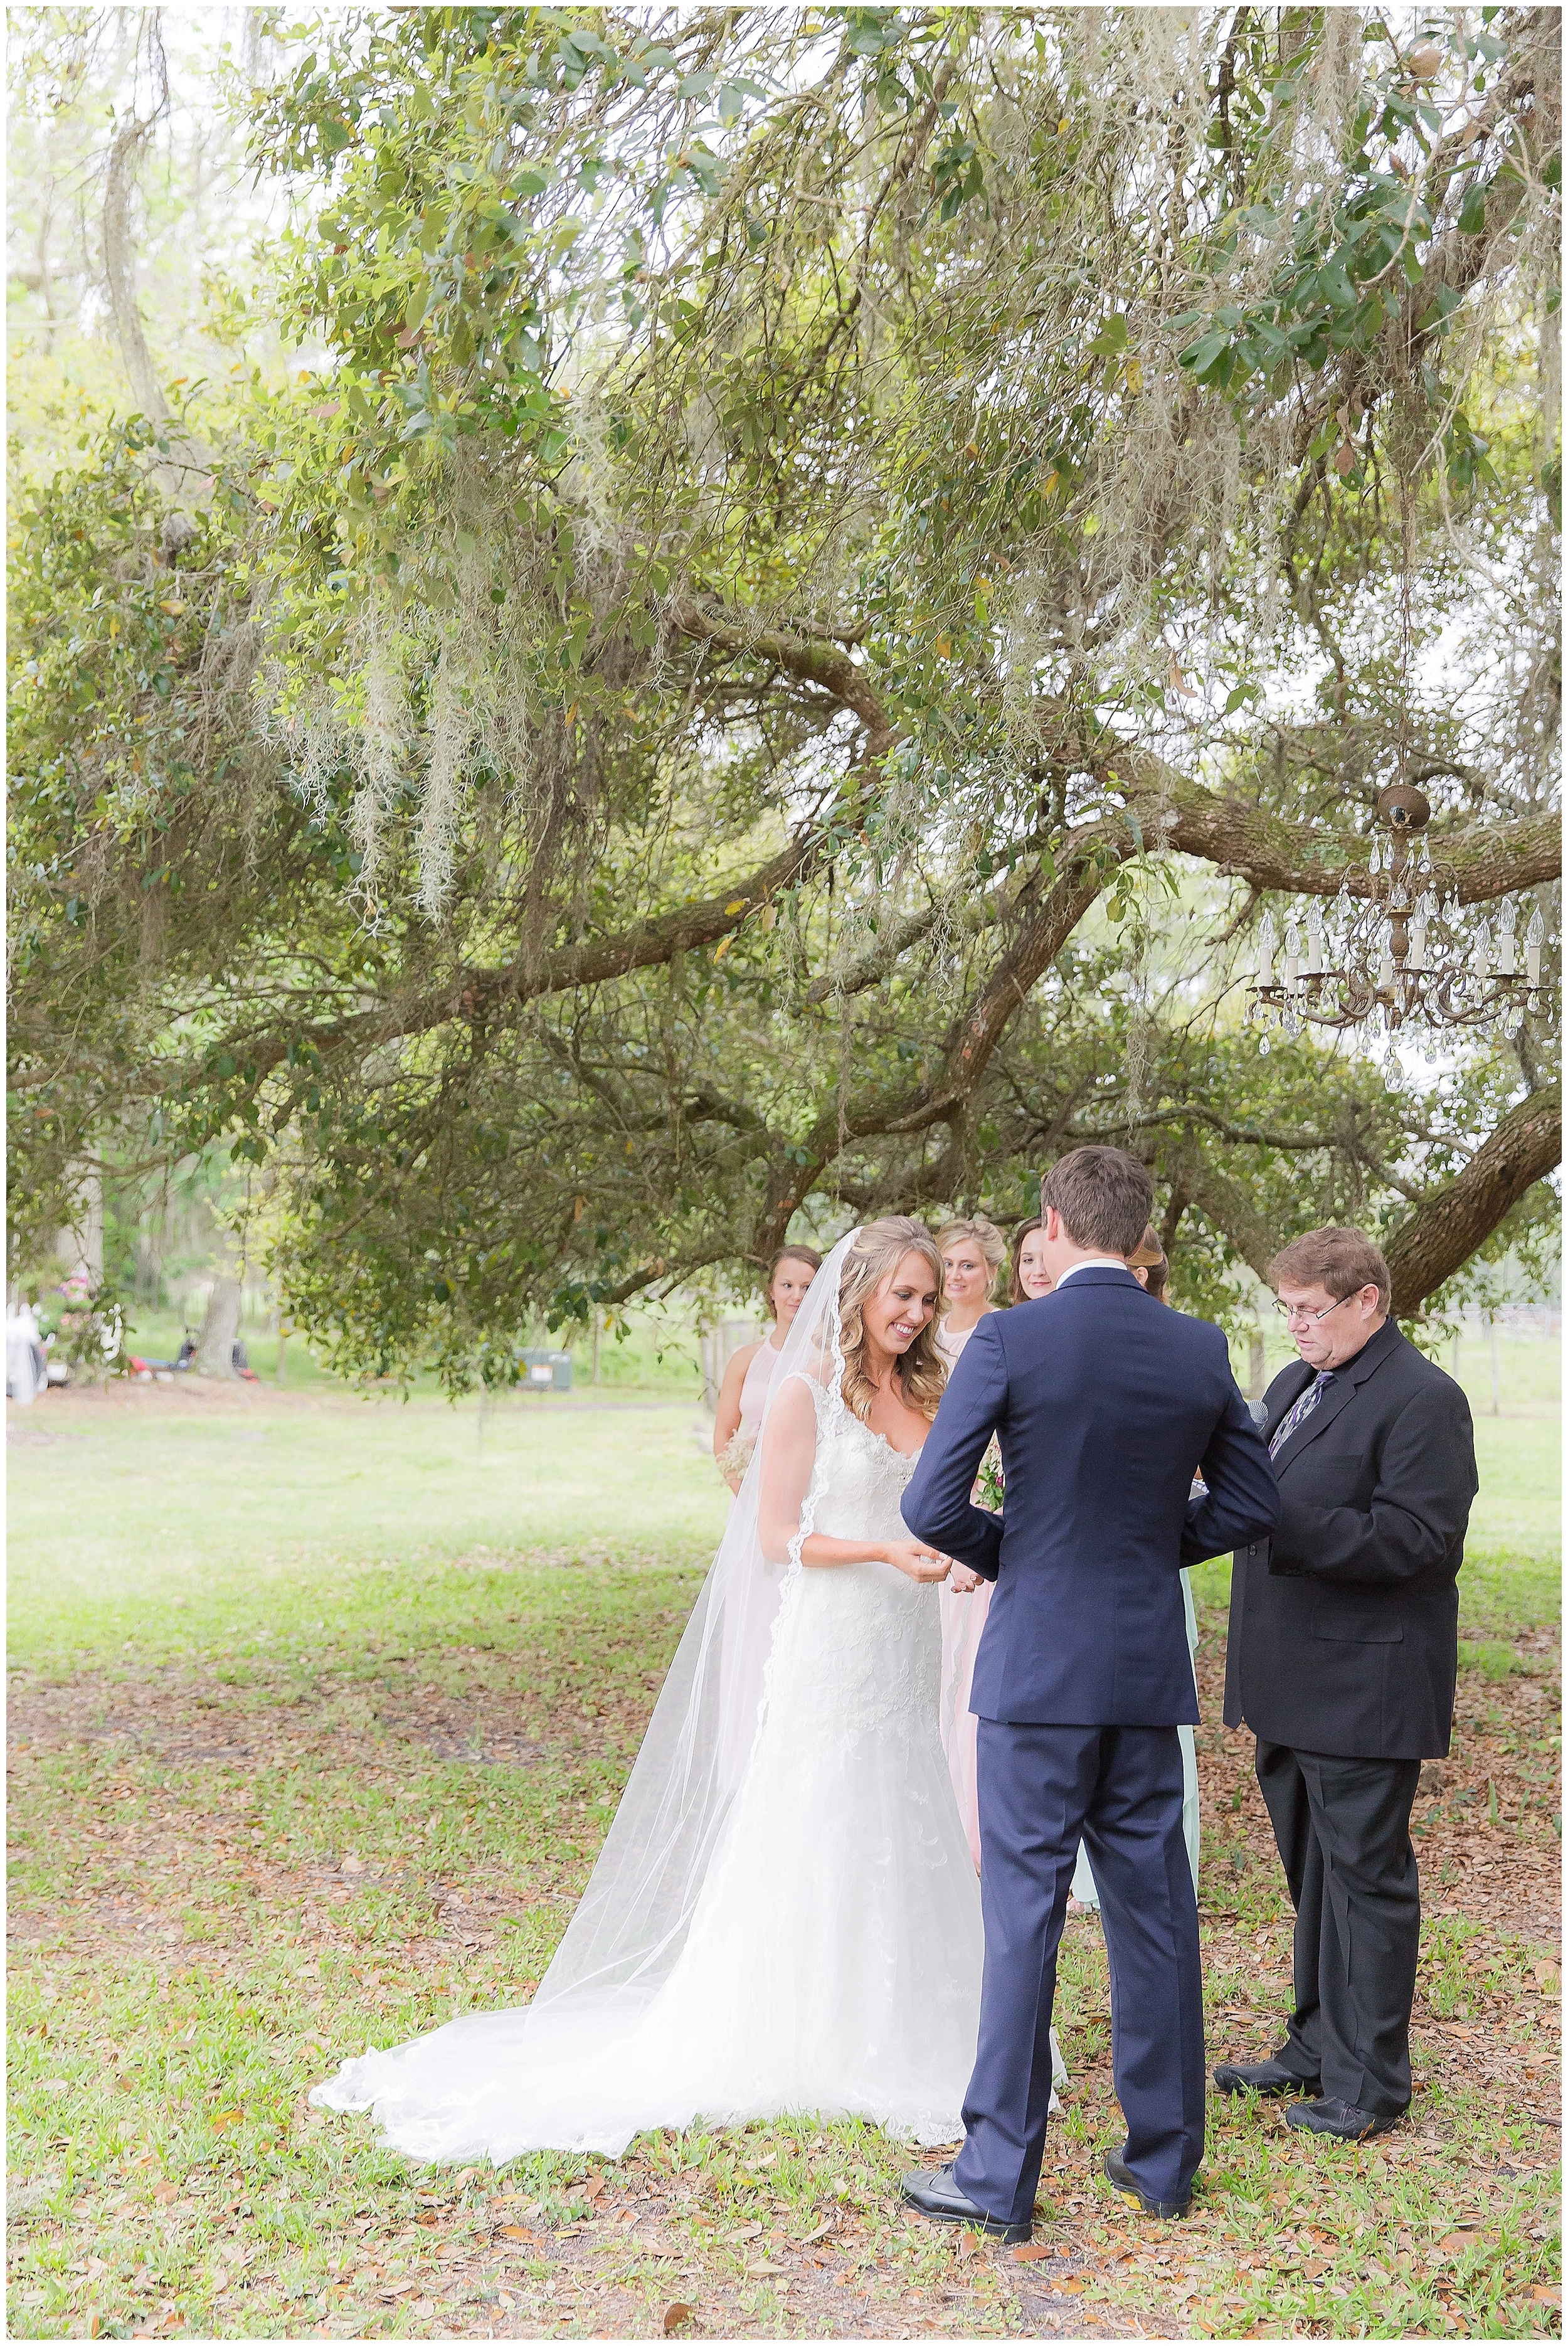 Intimate Outdoor wedding with a sweetheart Embellished Dress.  